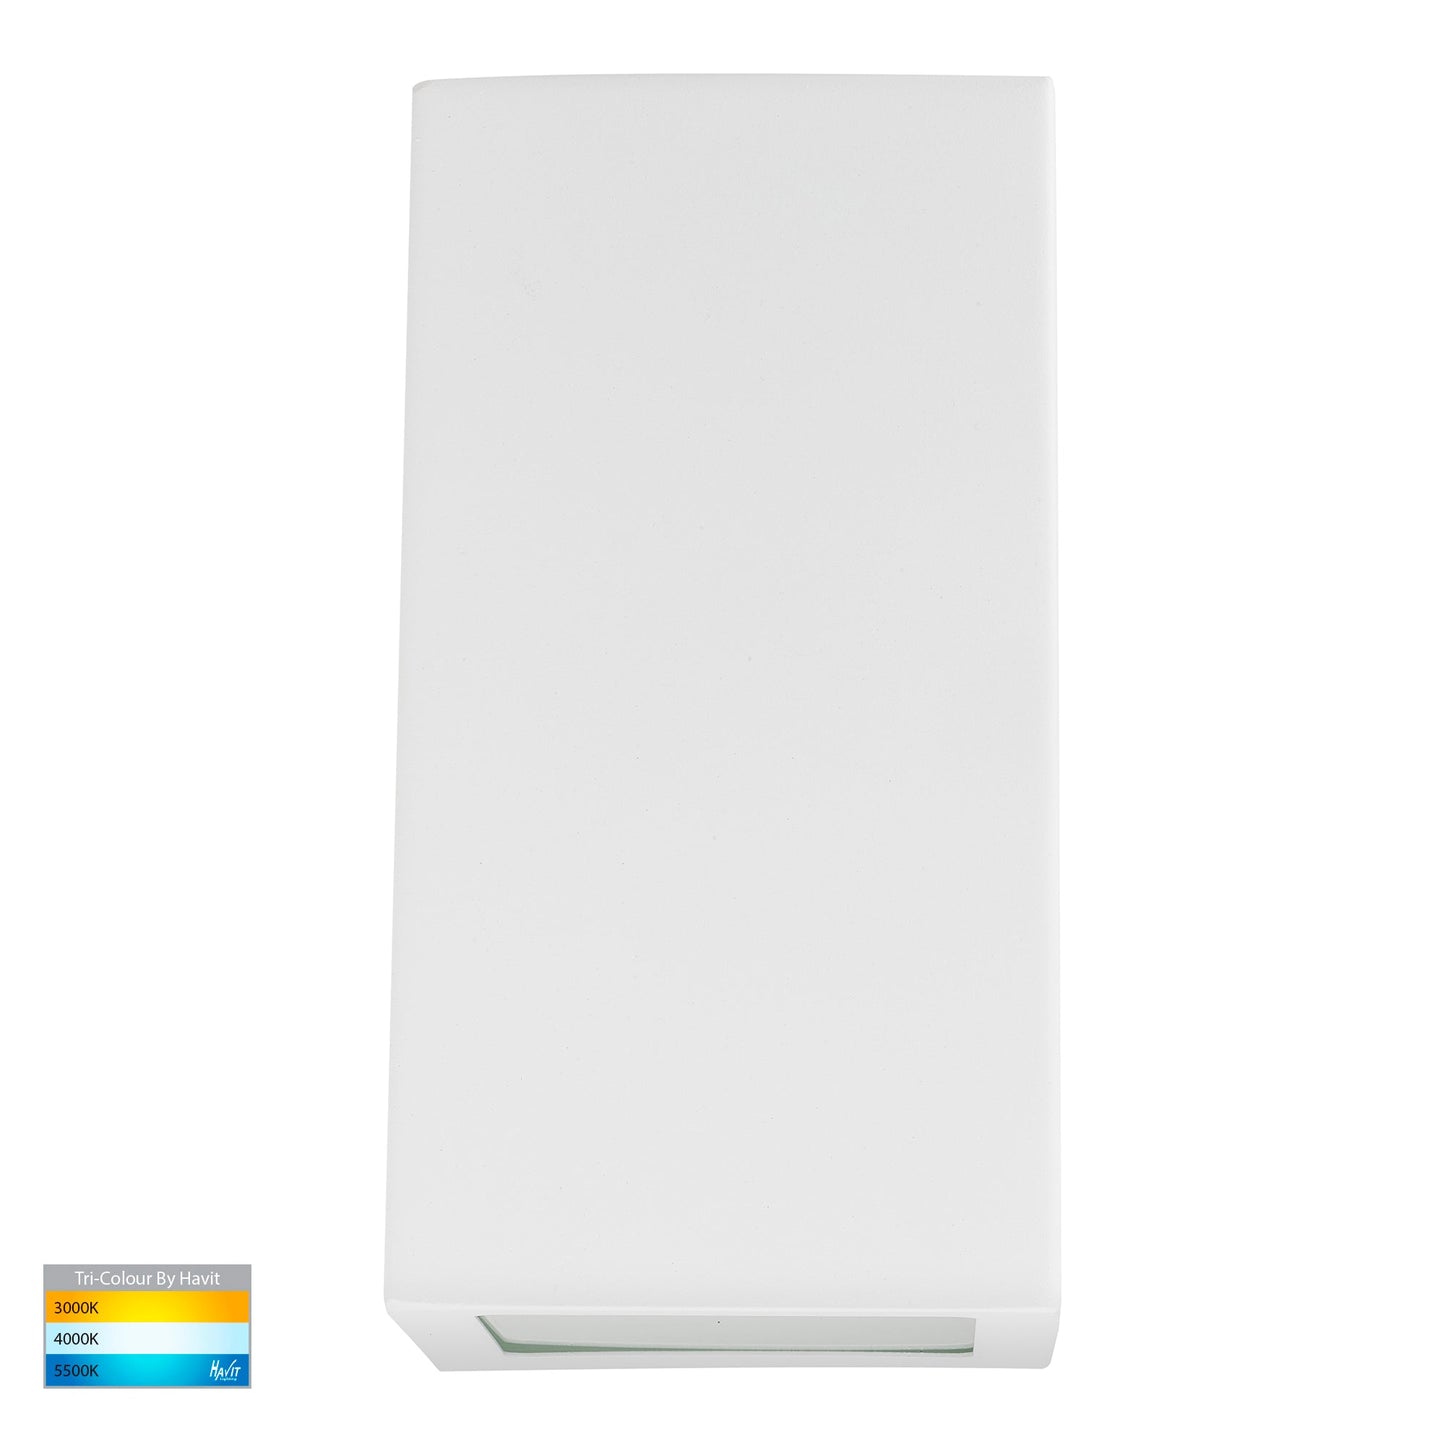 Square Wall Wedge Poly Powder Coated White  HV3601t-Wht